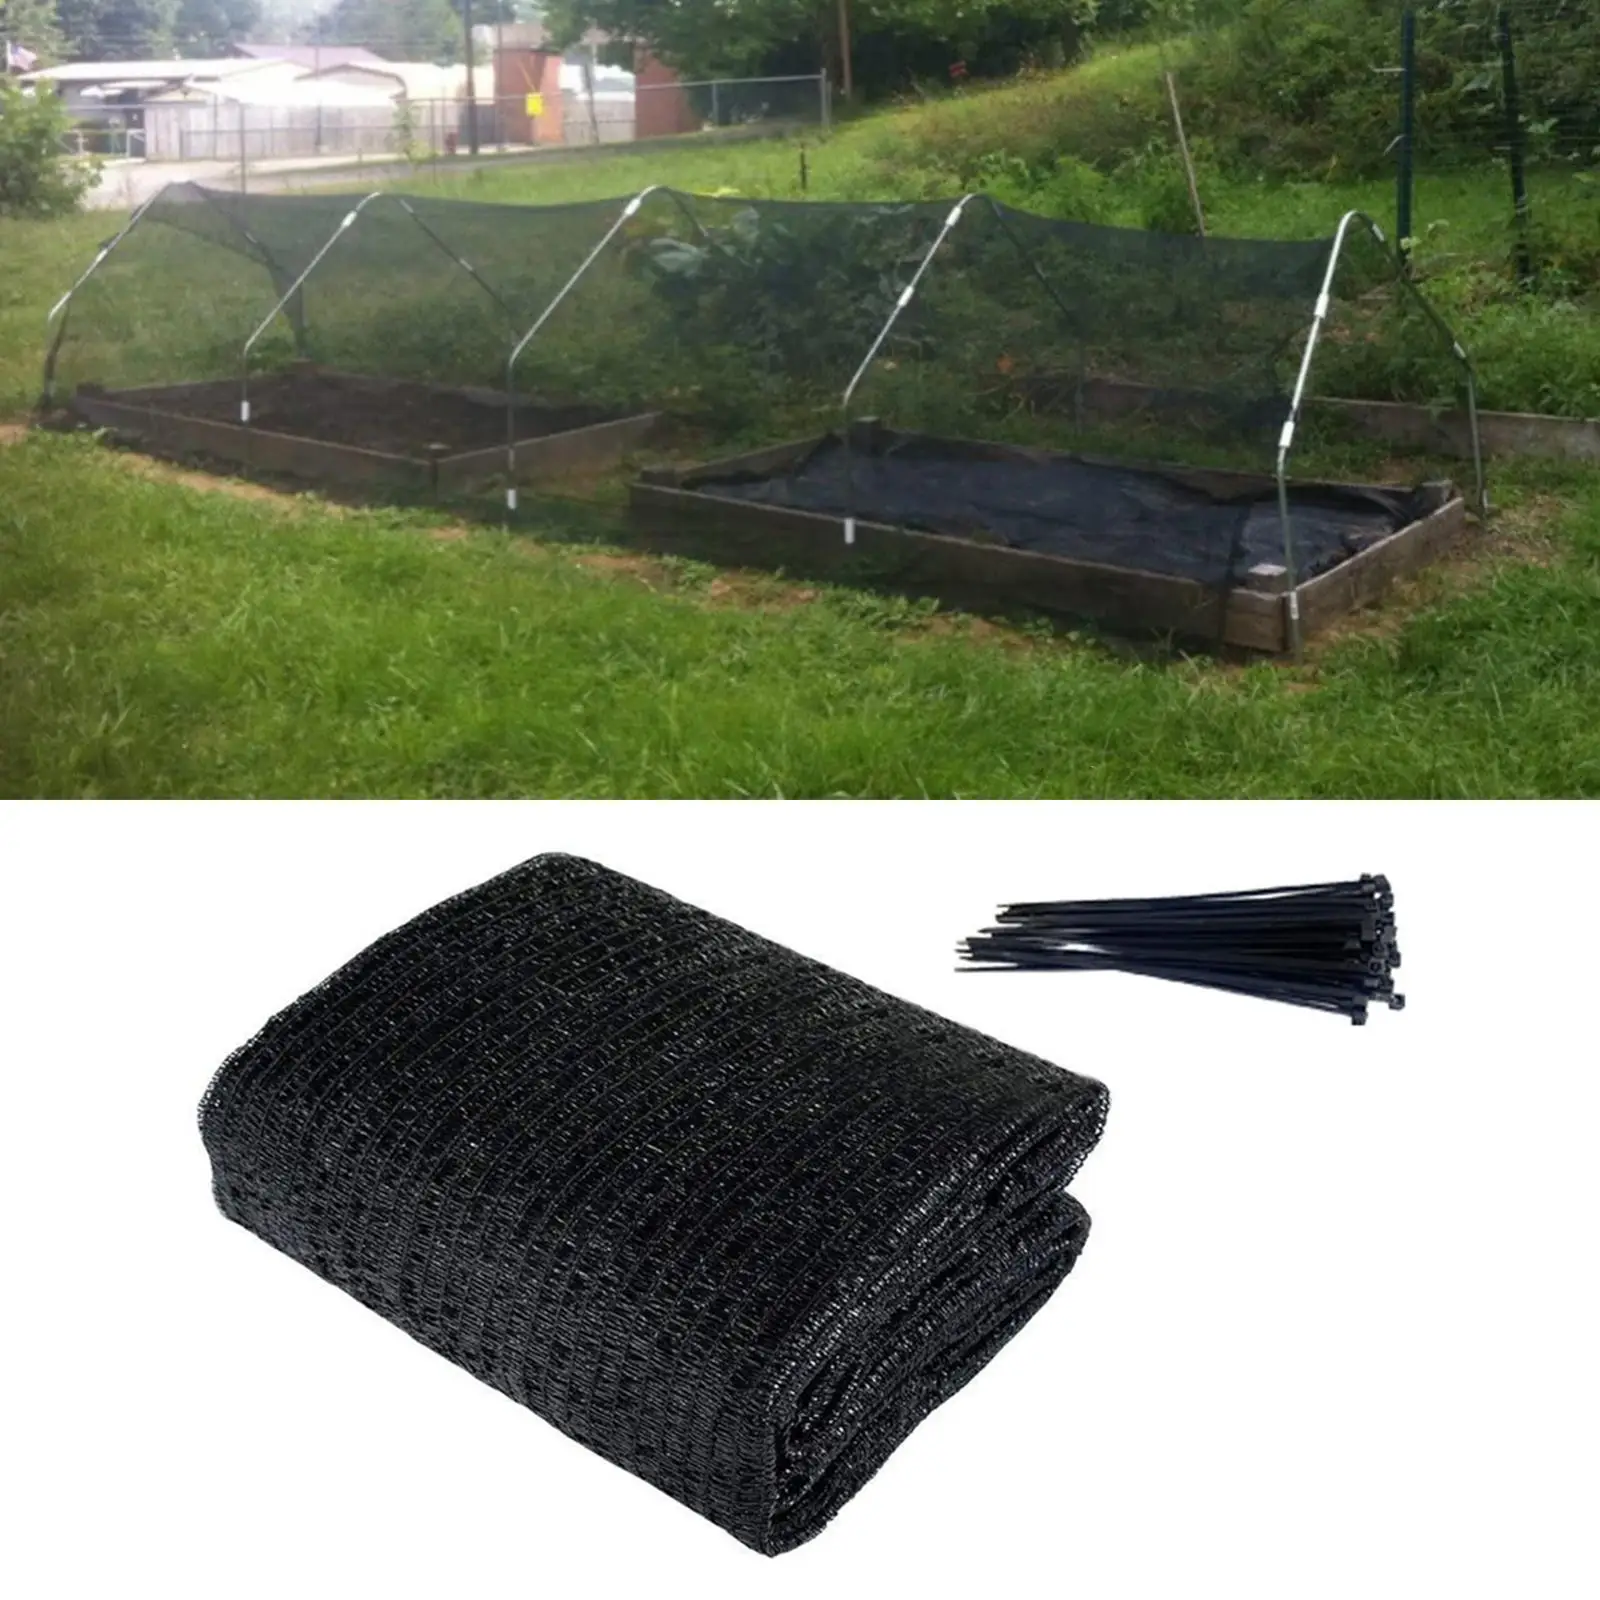 Sunblock Shade Cloth Net,Black Resistant 4x6m Garden Shade Mesh Tarp for Plant Cover,Greenhouse,Chicken Coop,Tomatoes,Plants